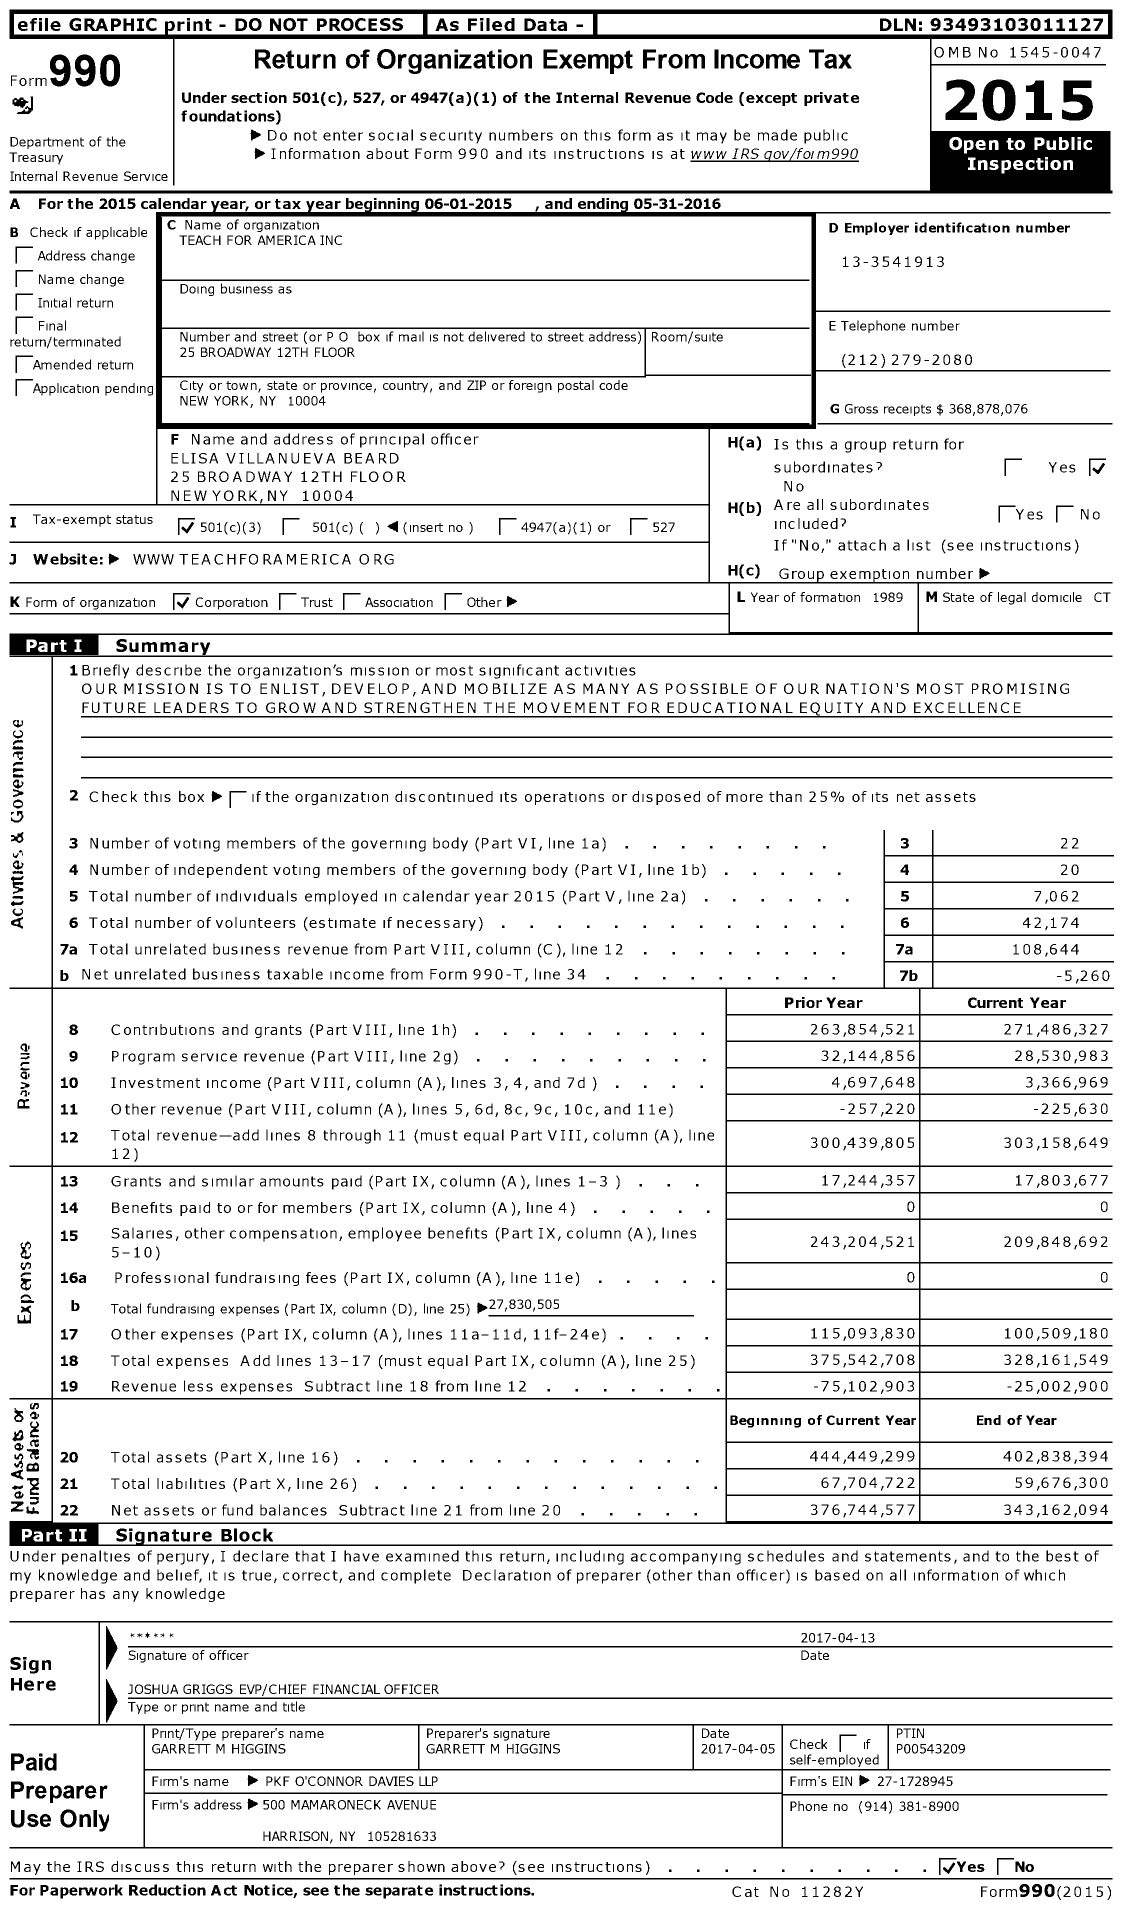 Image of first page of 2015 Form 990 for Teach for America (TFA)